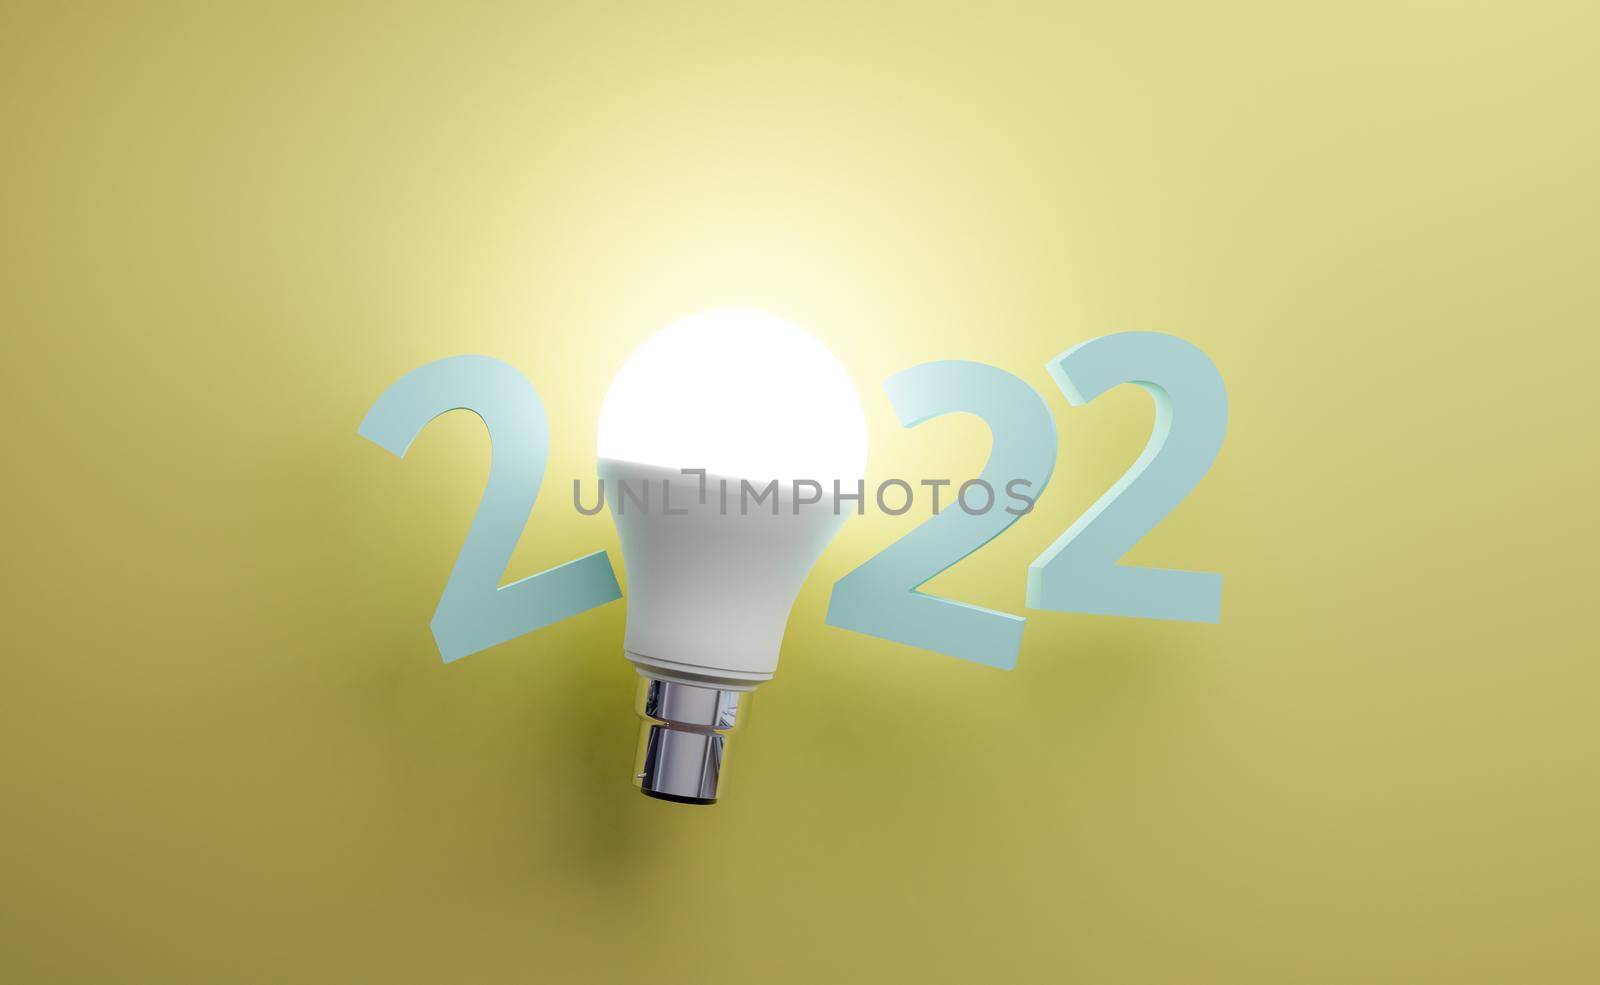 3d numbers for new year 2022 with bright led bulb in the center. 3d rendering